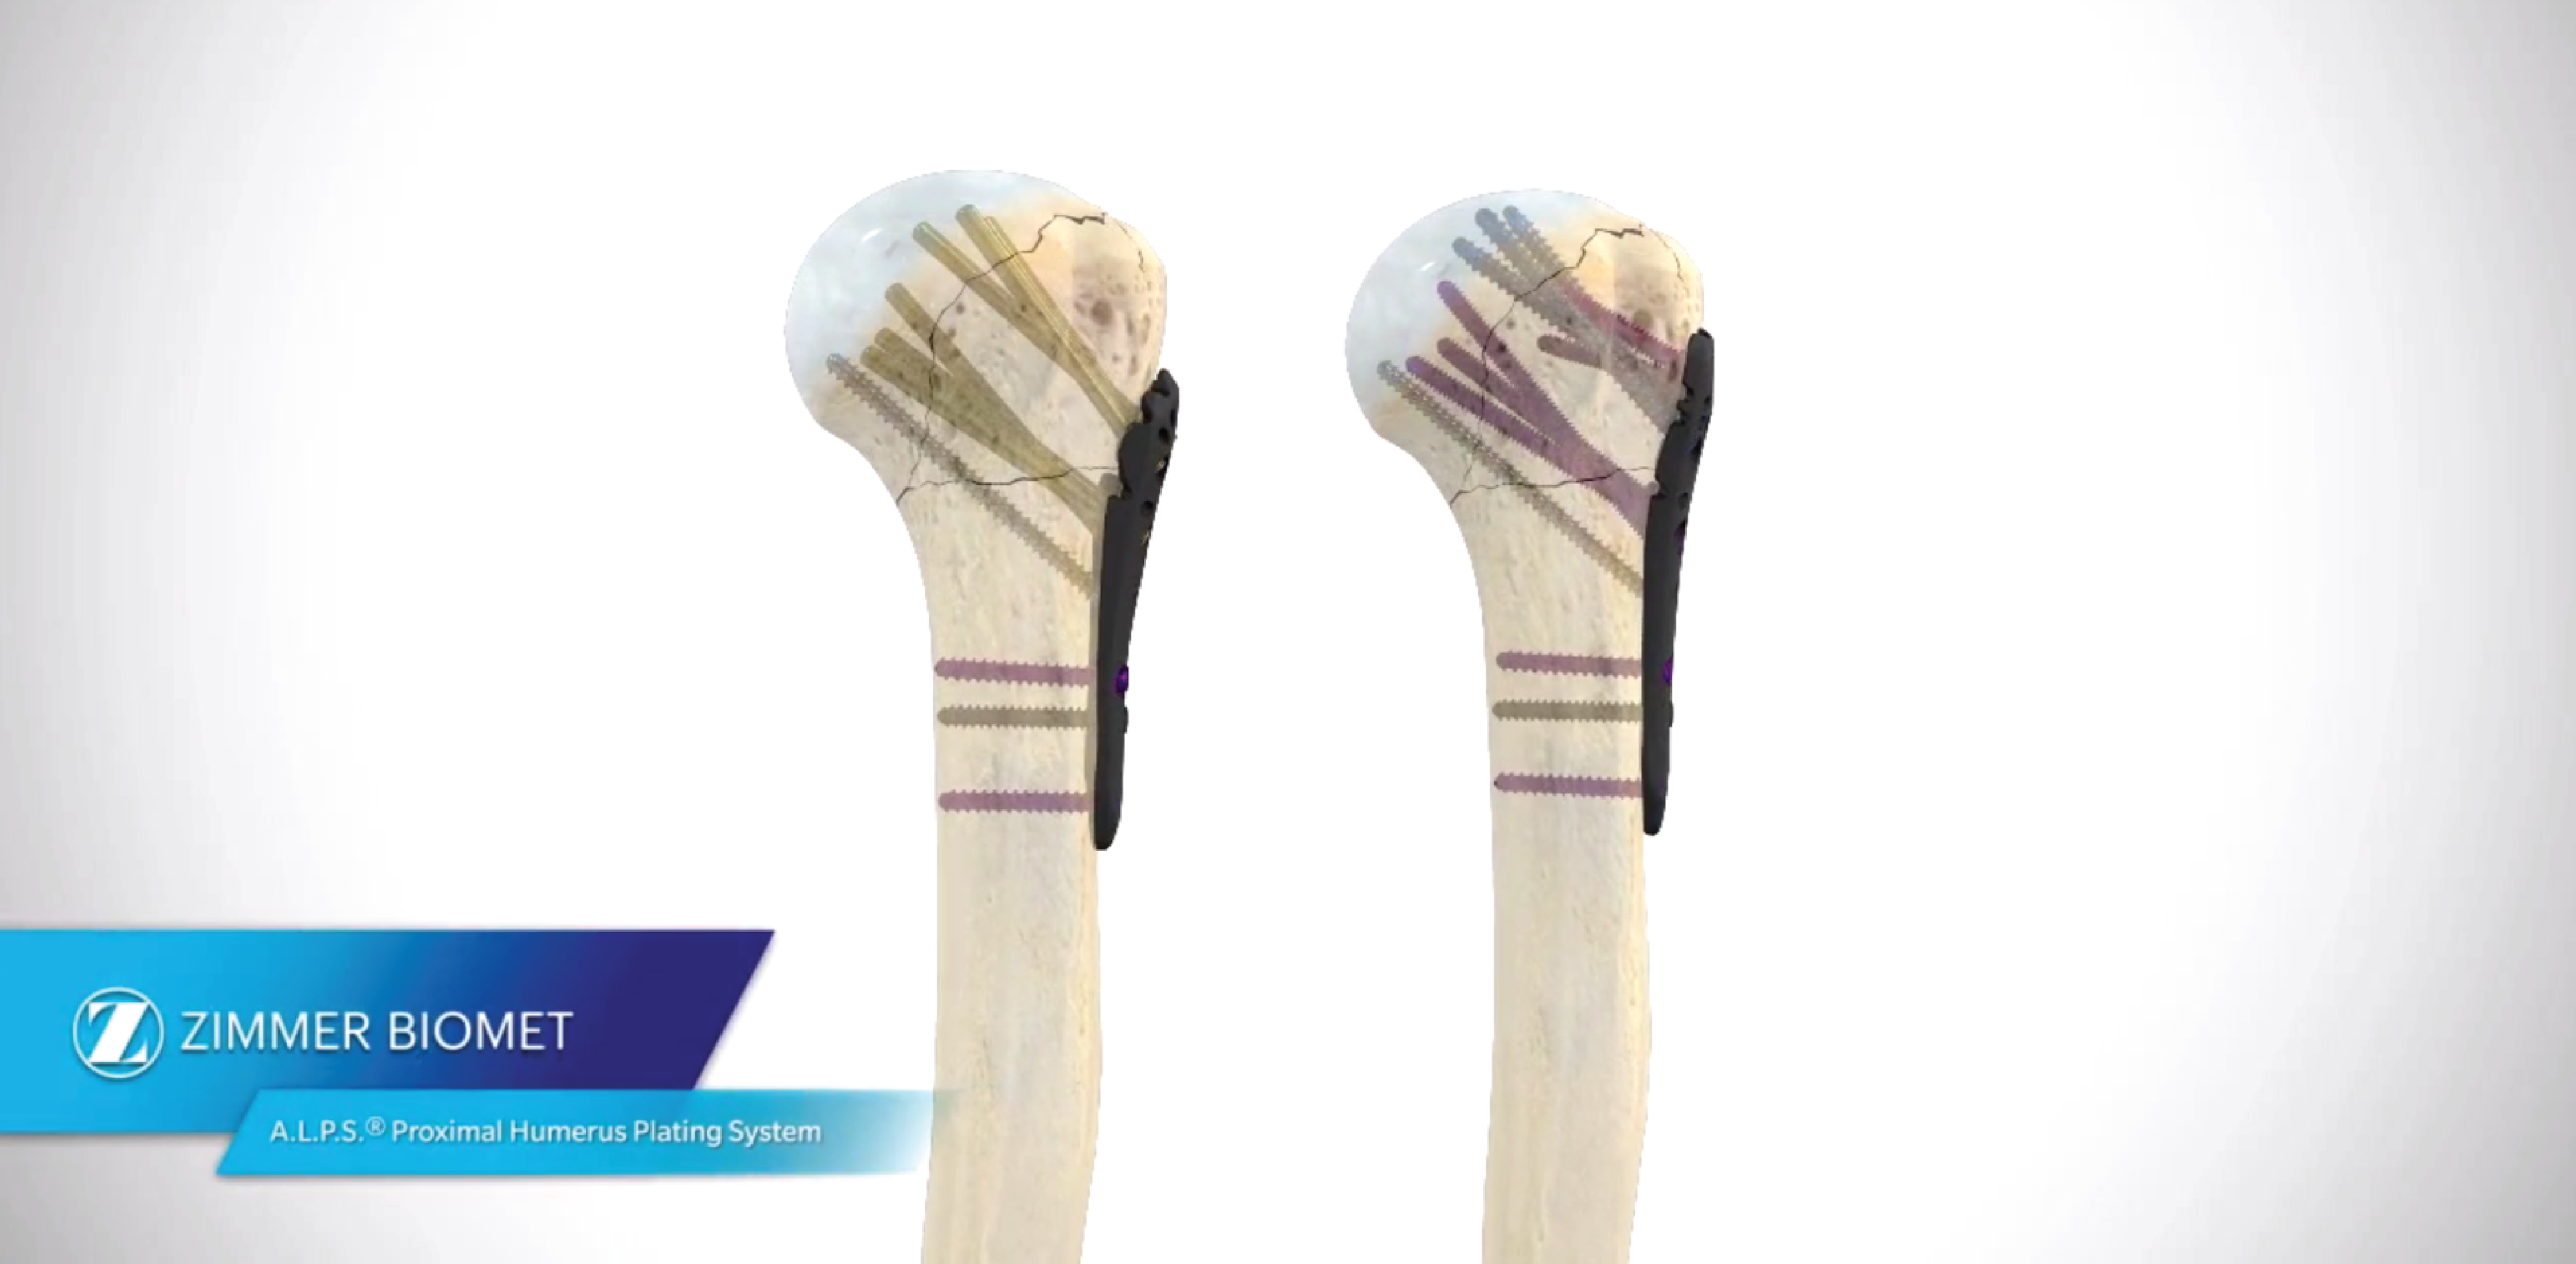 A.L.P.S Proximal Humerus Plating System